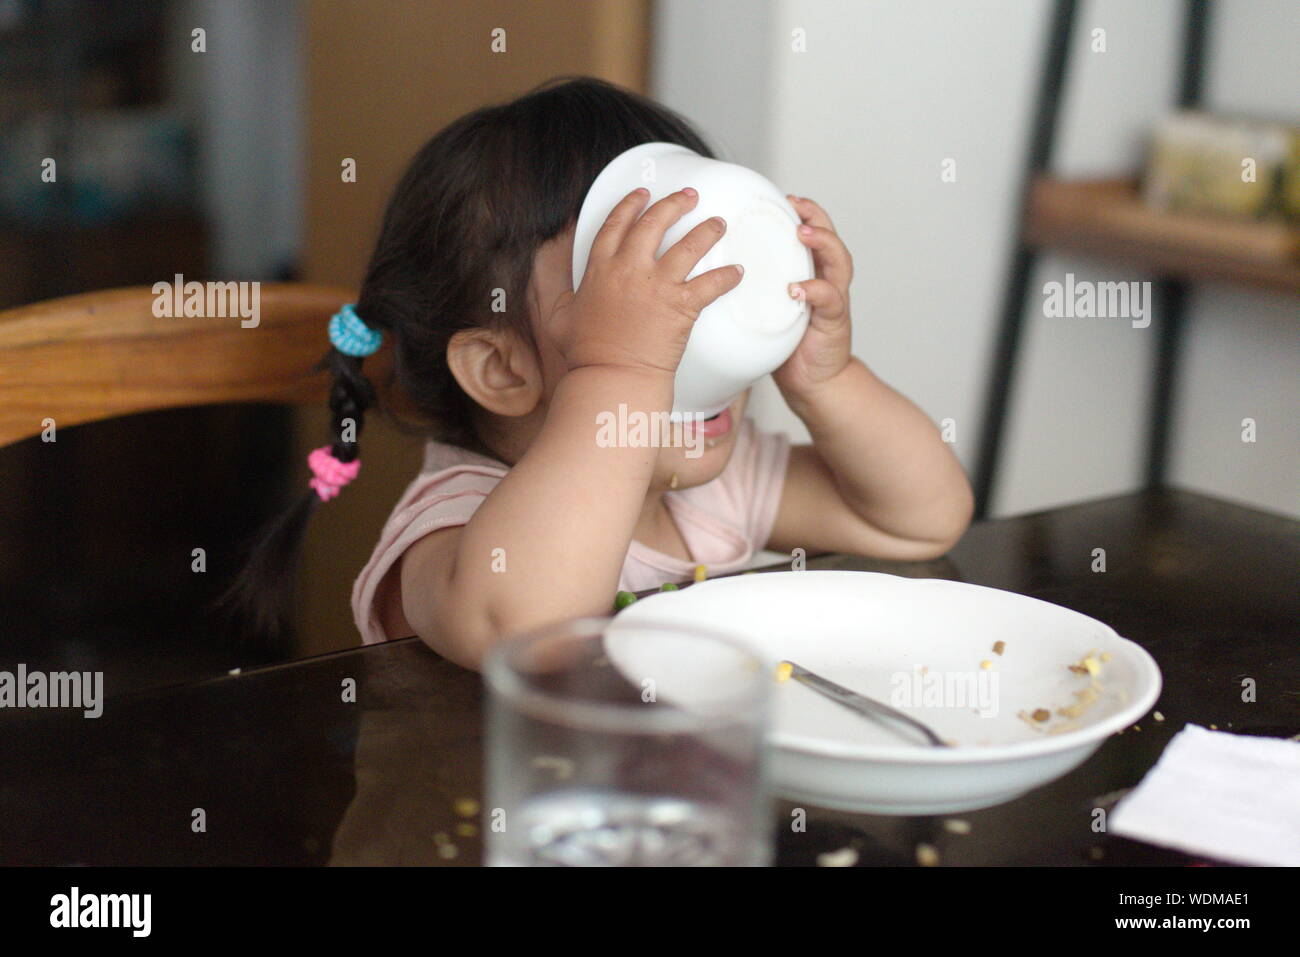 Toddler girl eating all her food and empty dishes Stock Photo